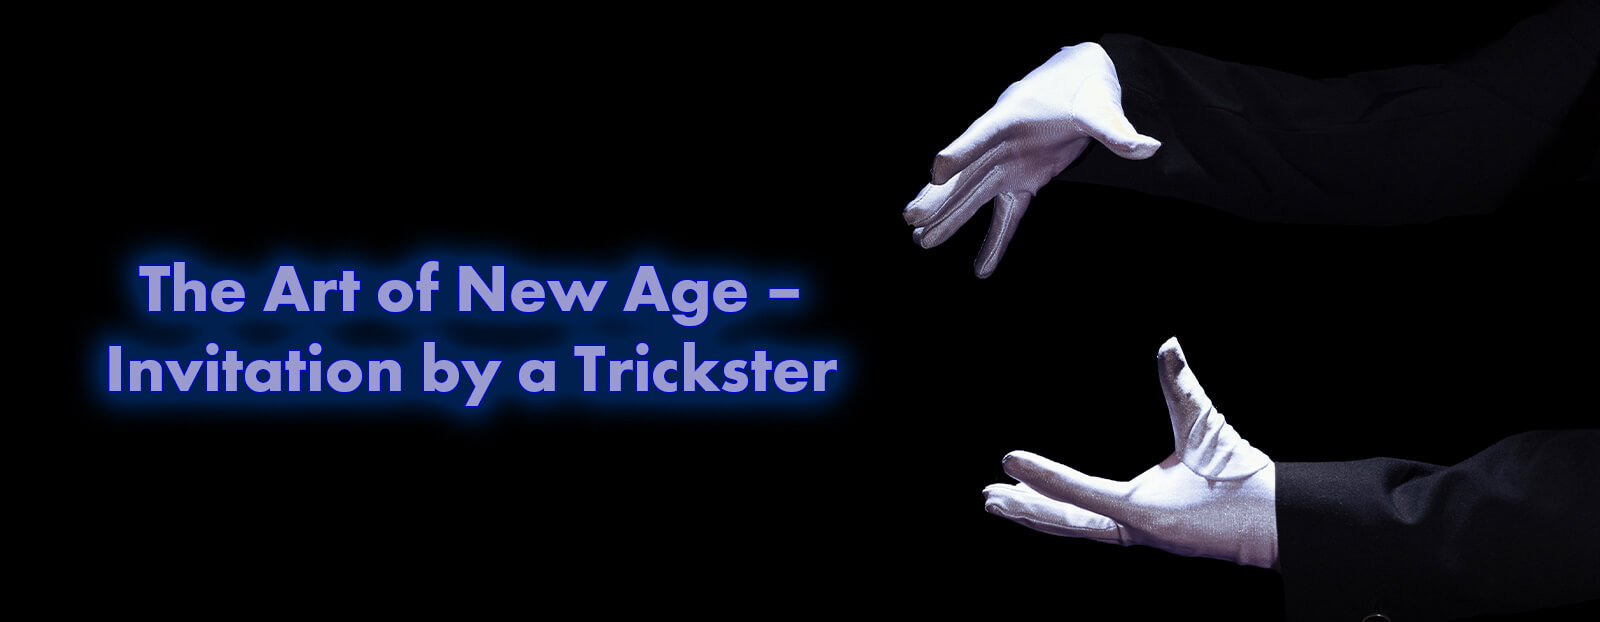 The Art of New Age – Invitation by a Trickster